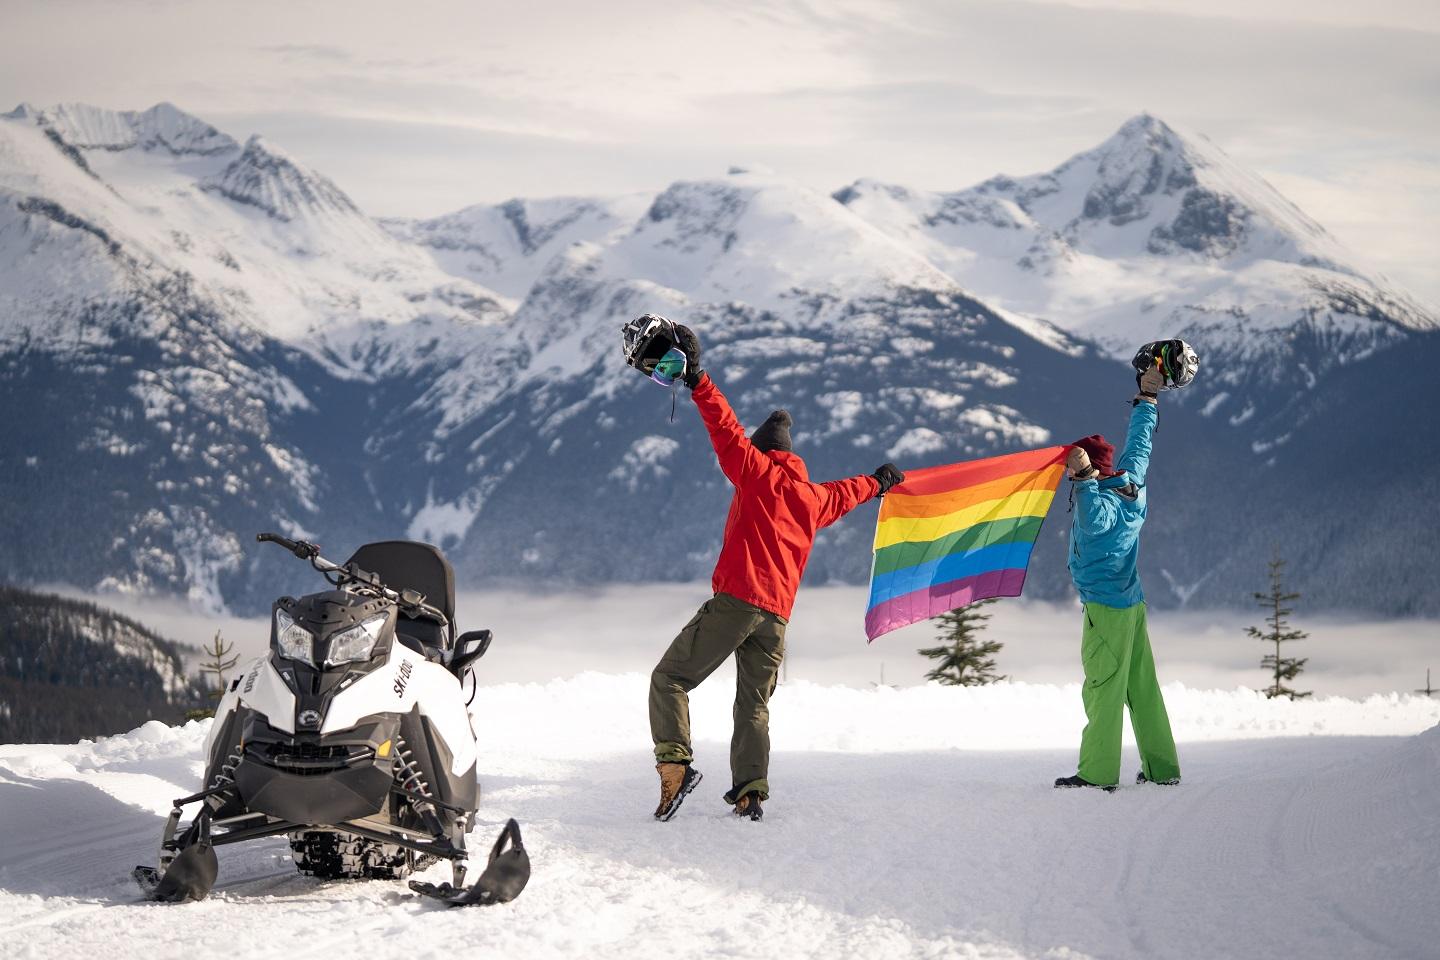 Two skiers hold up a pride flag next to a snowmobile in the mountains of Whistler